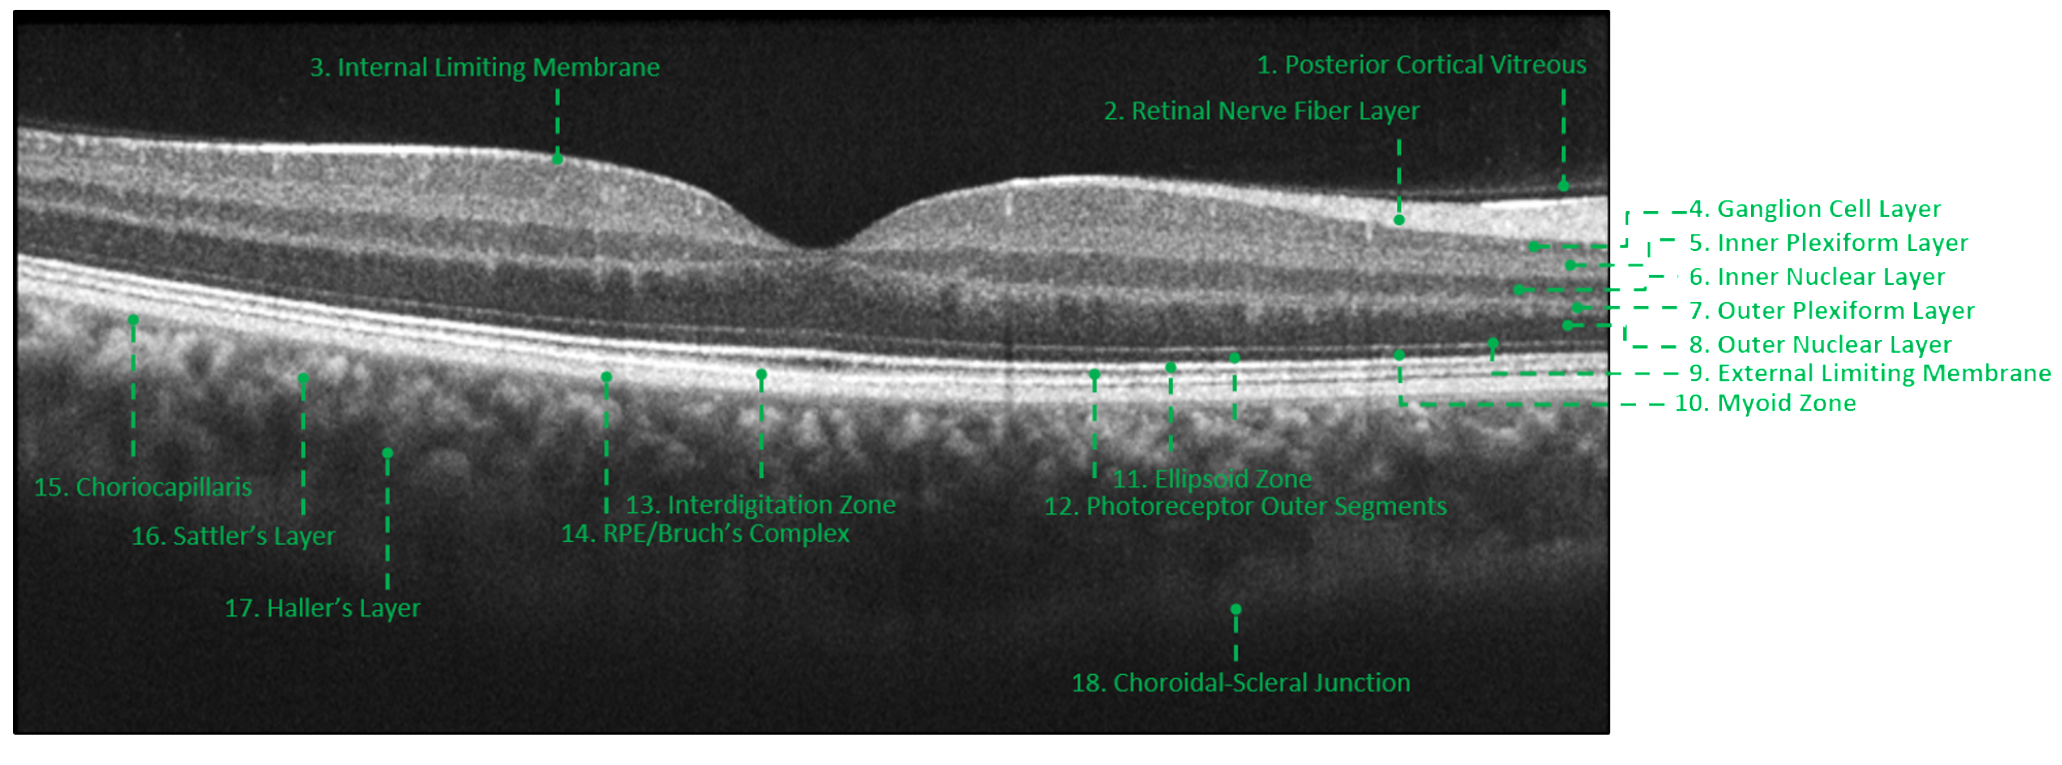 In this healthy macula each layer of the retina can be distinctly identified due to differences in their reflectivities